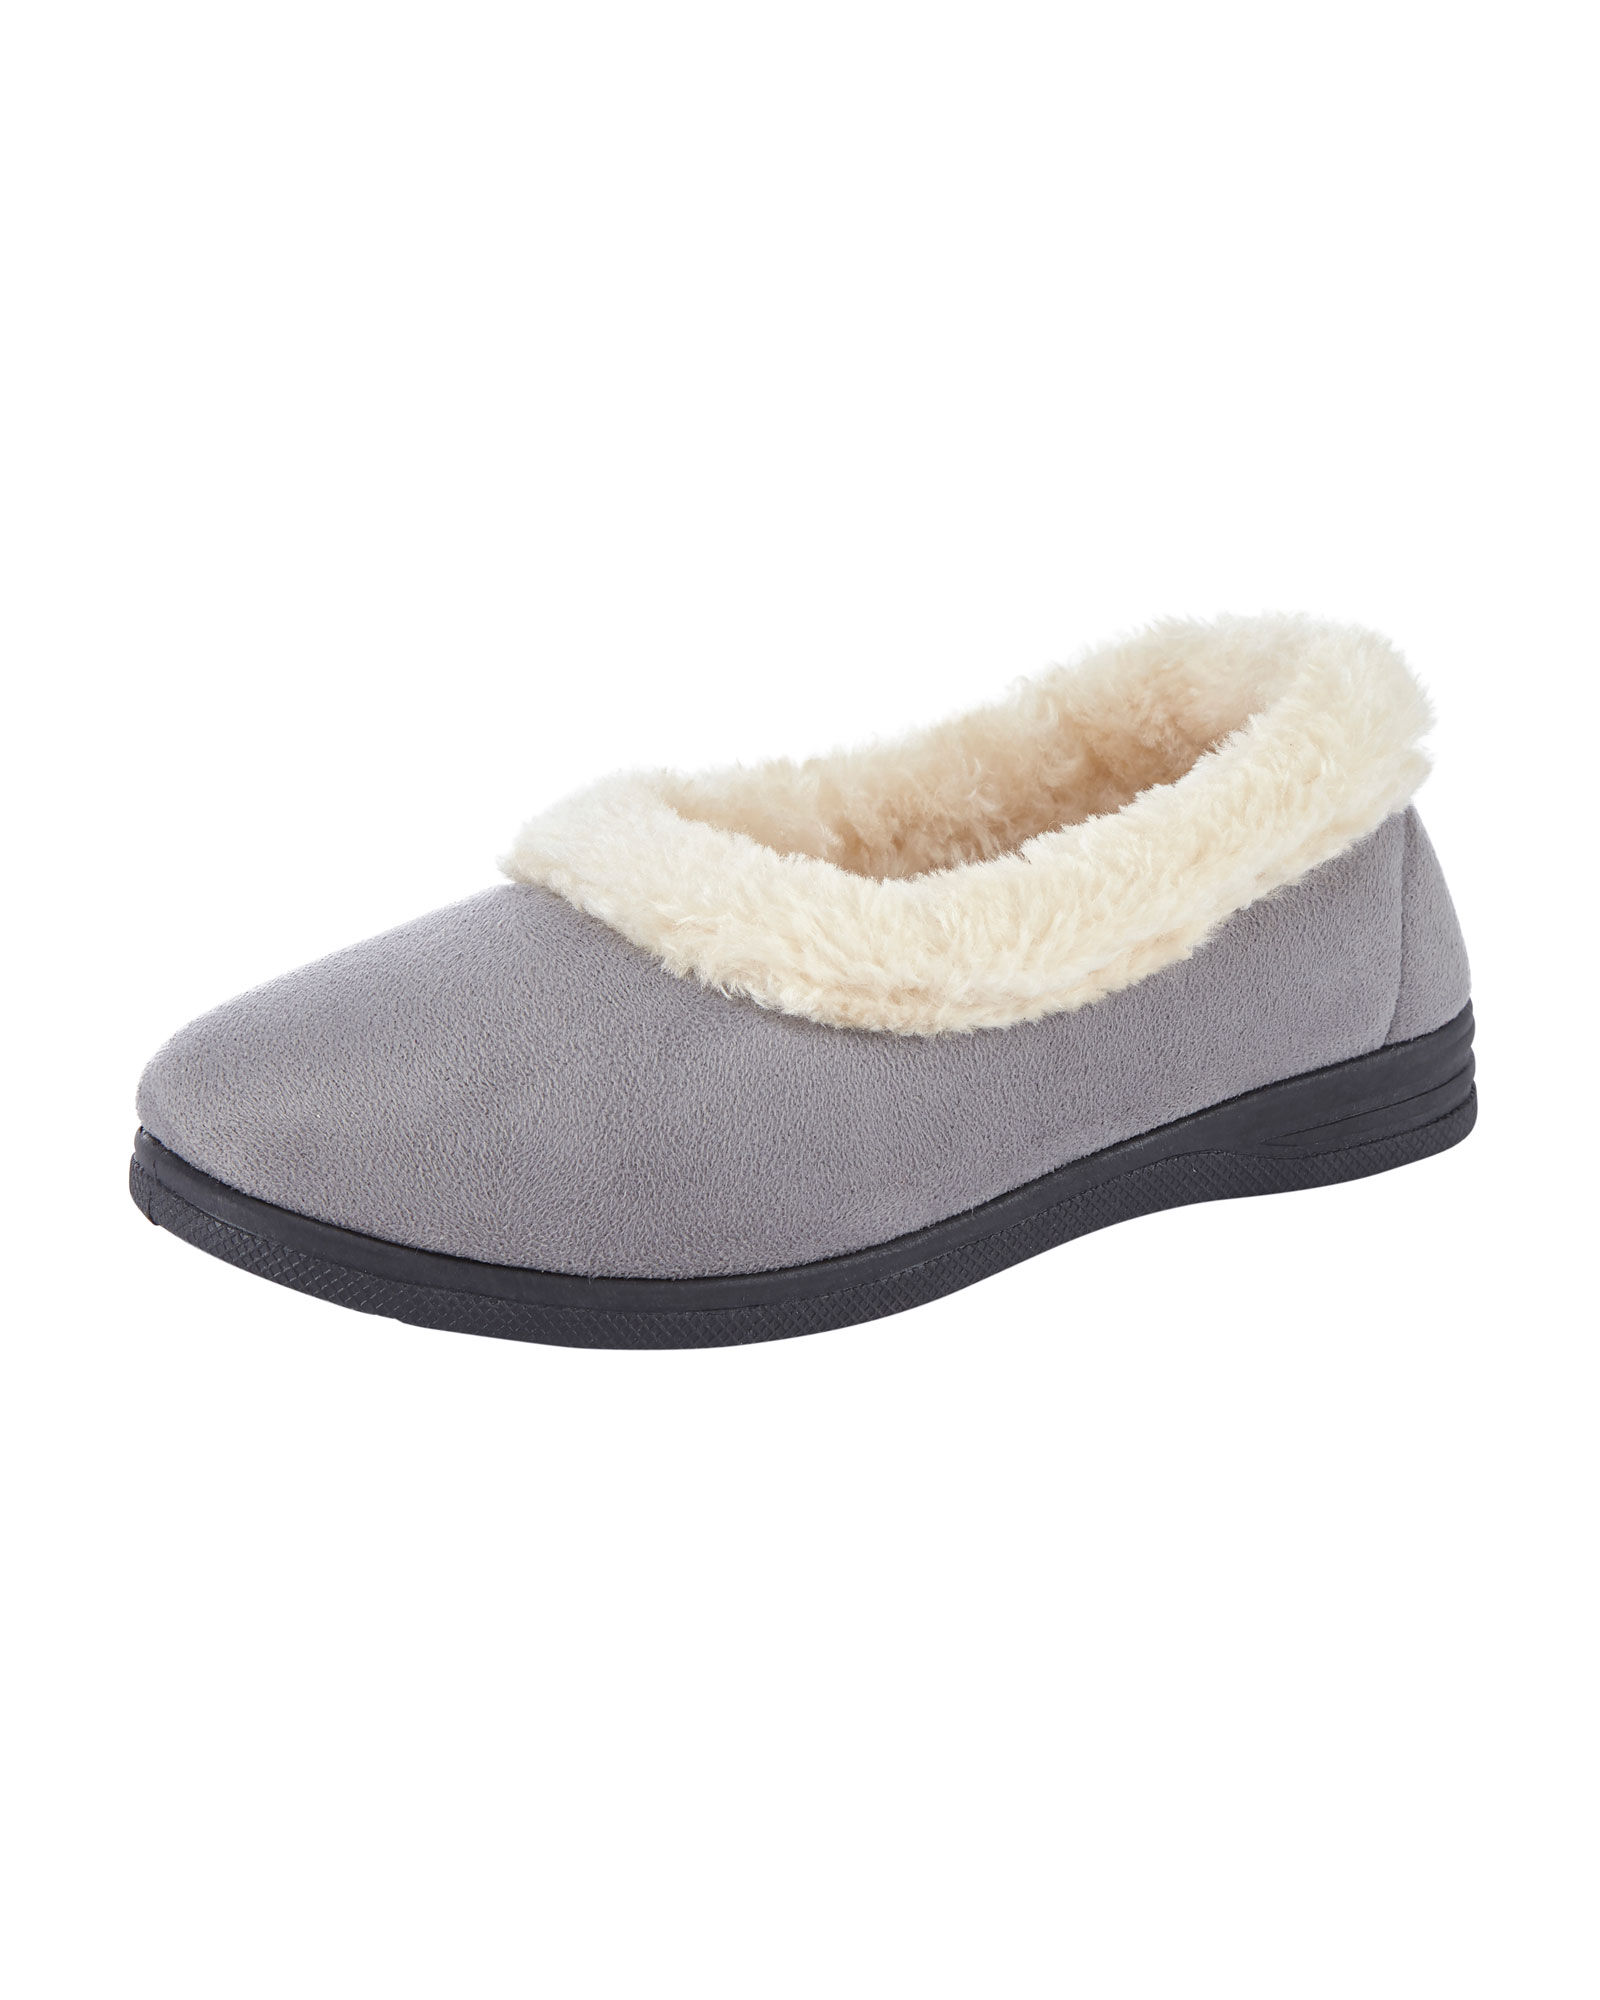 Buy > cotton traders slippers womens > in stock